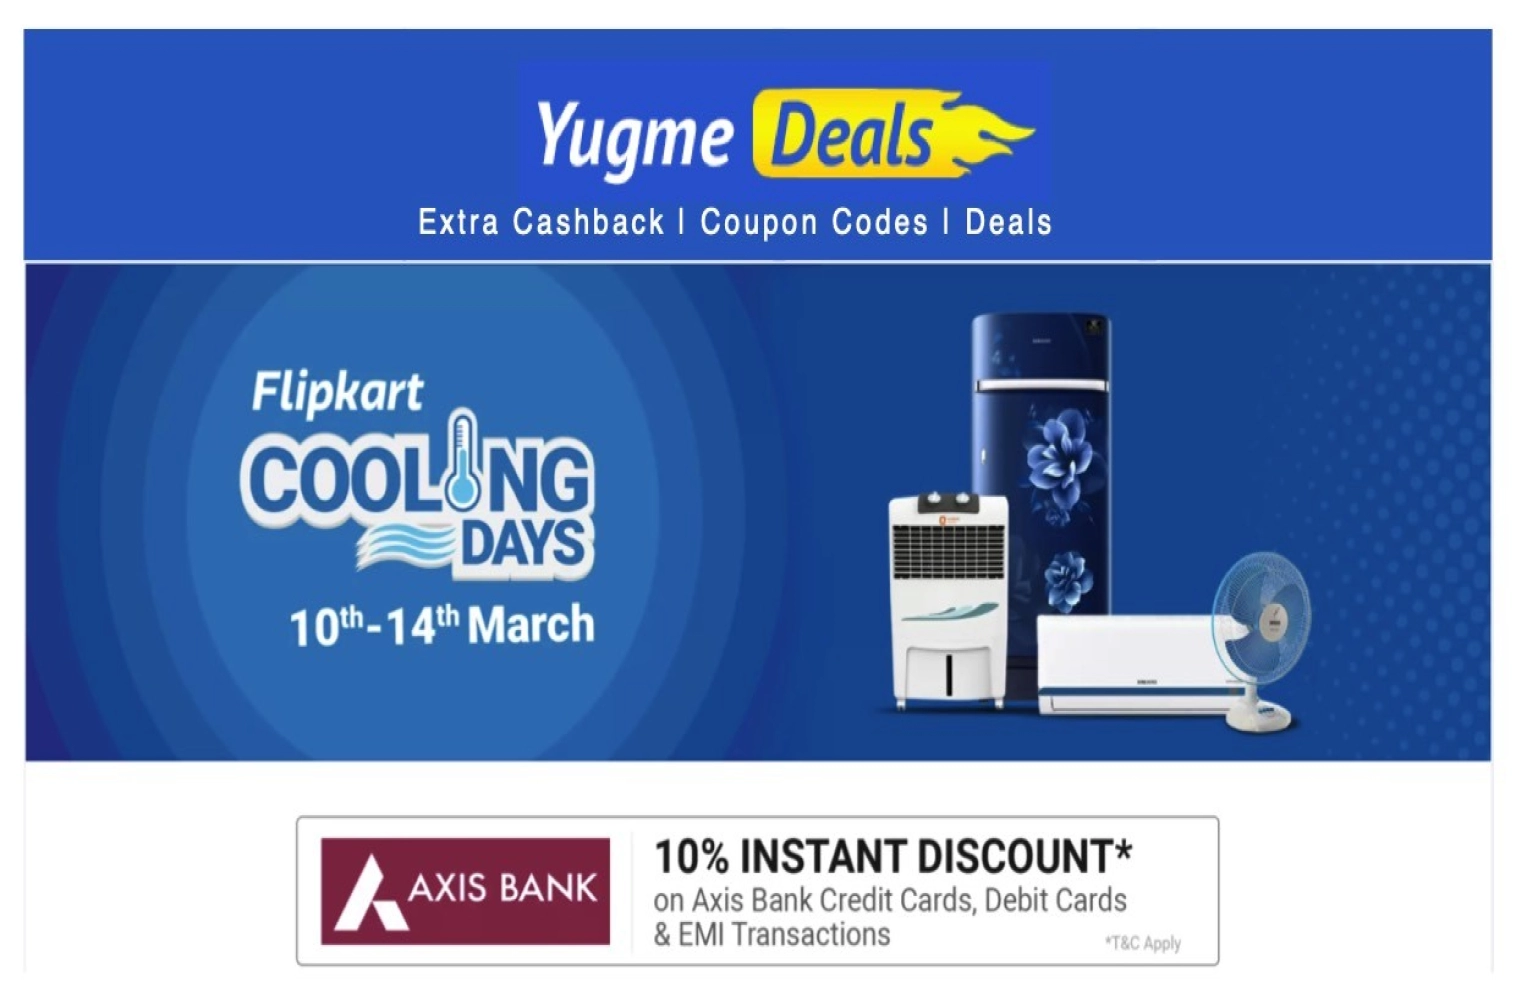 Flipkart Cooling Days 10th - 14th march